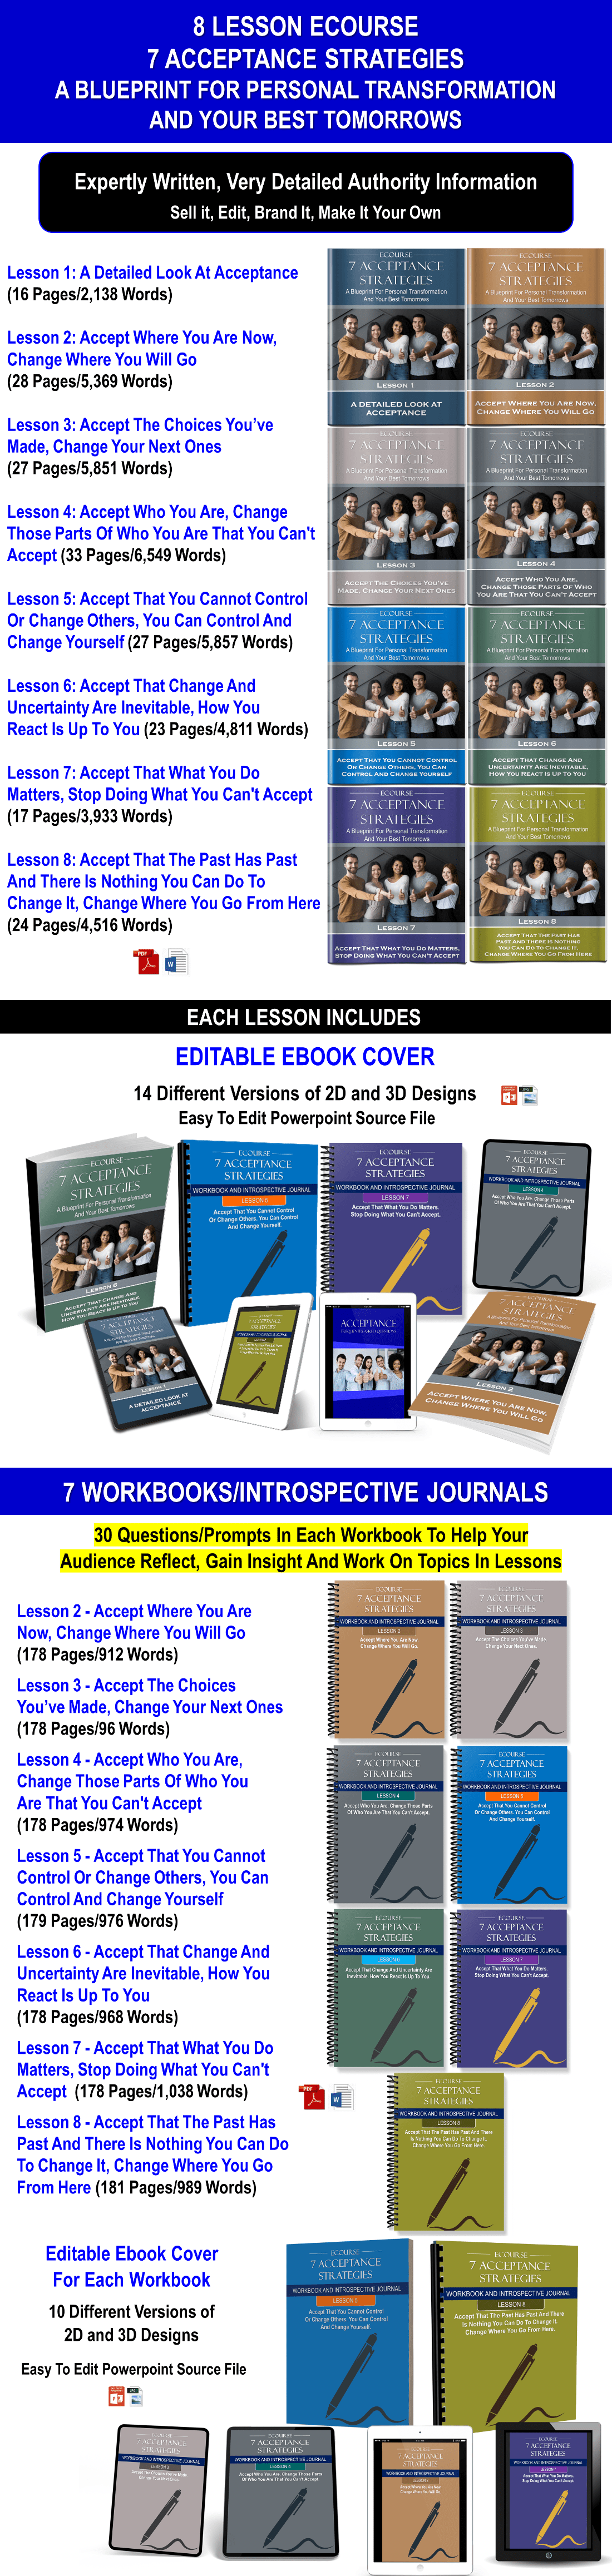 8 Lesson eCourse - 7 Acceptance Strategies - A Blueprint For Personal Transformation And Your Best Tomorrows Giant Content Pack with PLR Rights